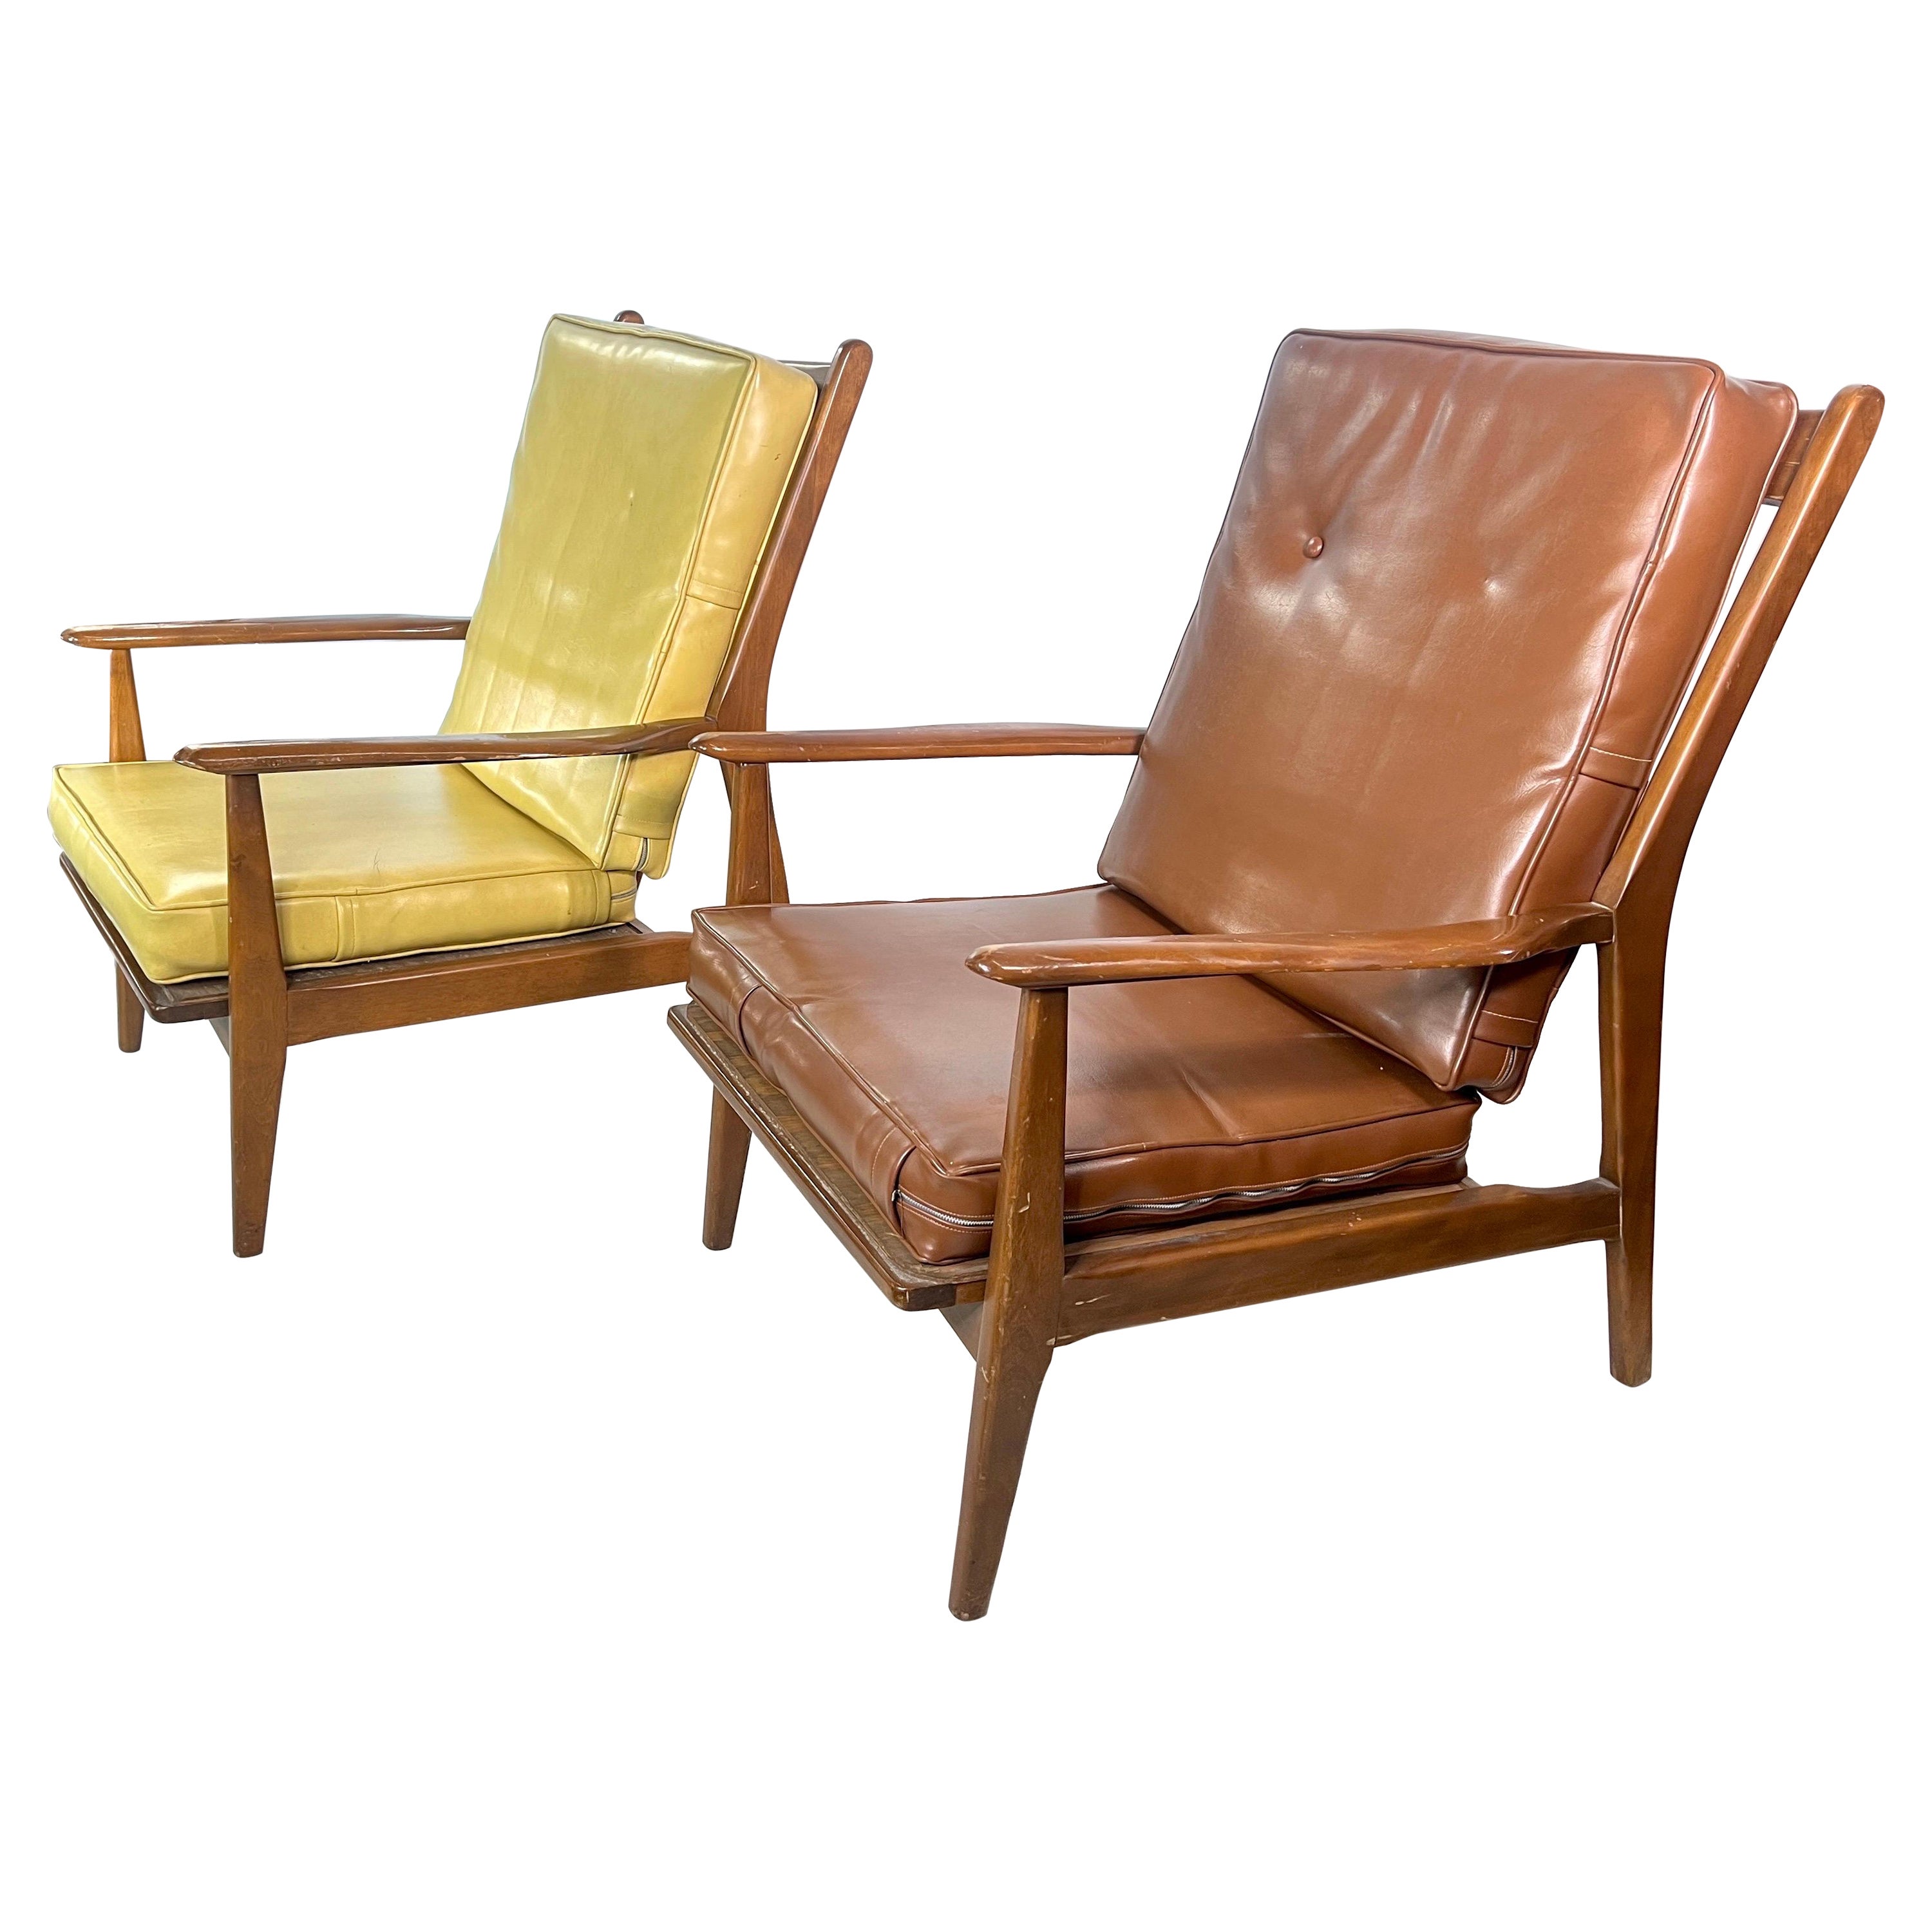 Midcentury Walnut Danish Style Lounge Chairs, a Pair For Sale